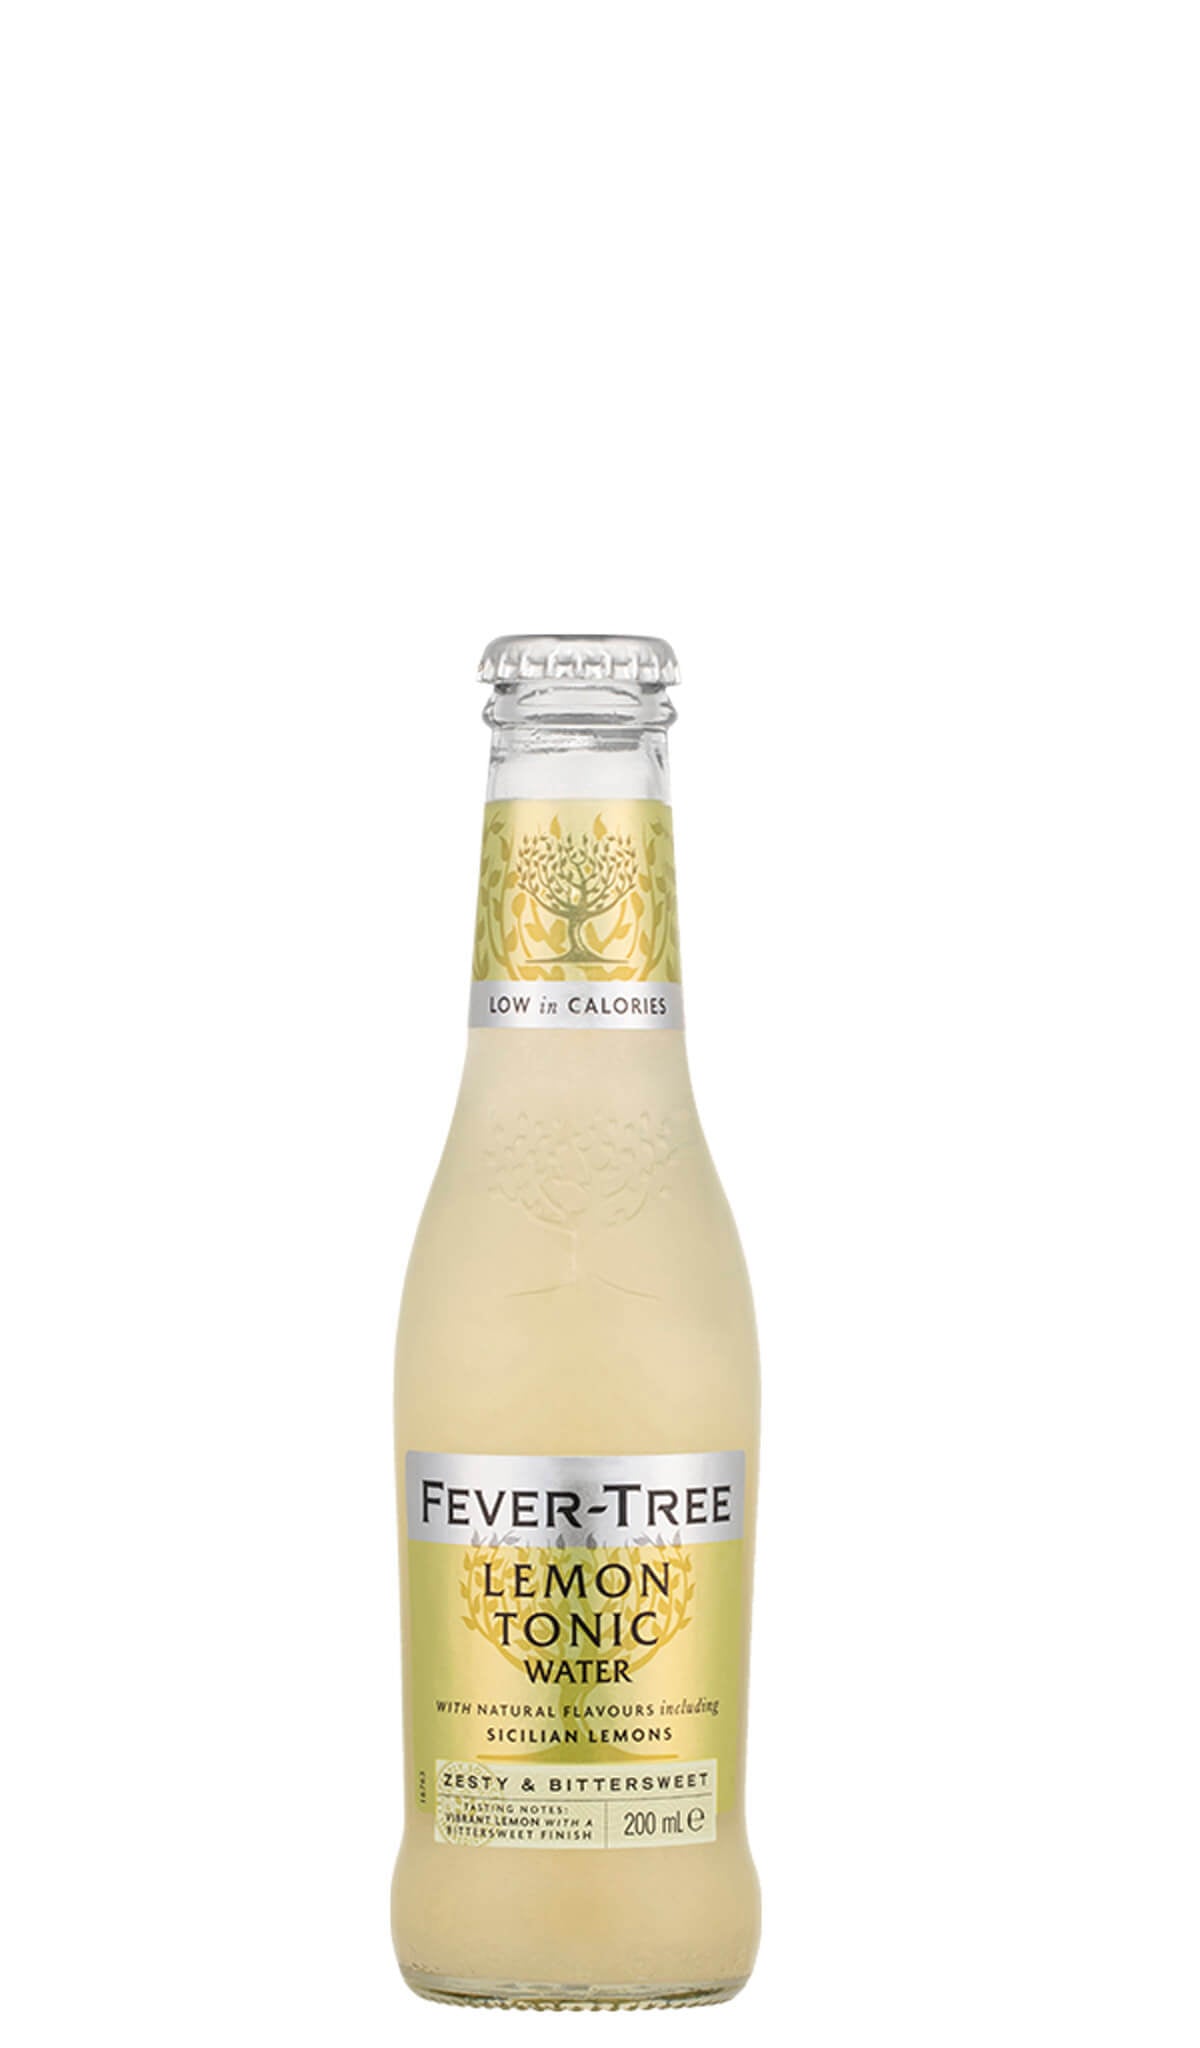 Find out more or buy 4 x Fever-Tree Lemon Tonic Water 200ml online at Wine Sellers Direct - Australia’s independent liquor specialists.